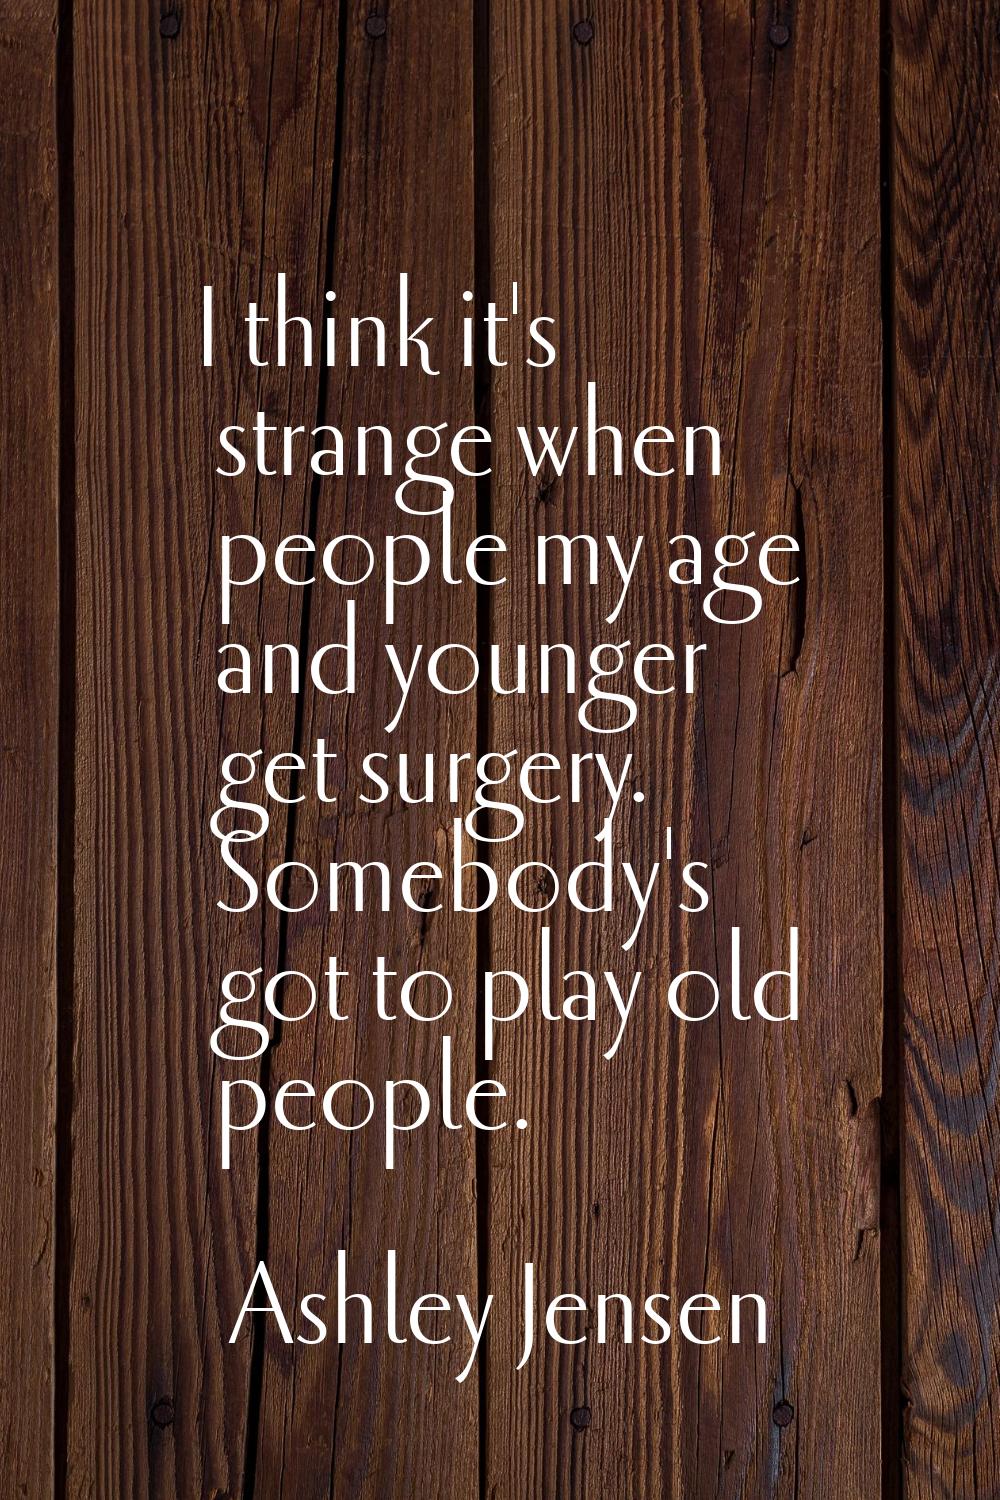 I think it's strange when people my age and younger get surgery. Somebody's got to play old people.